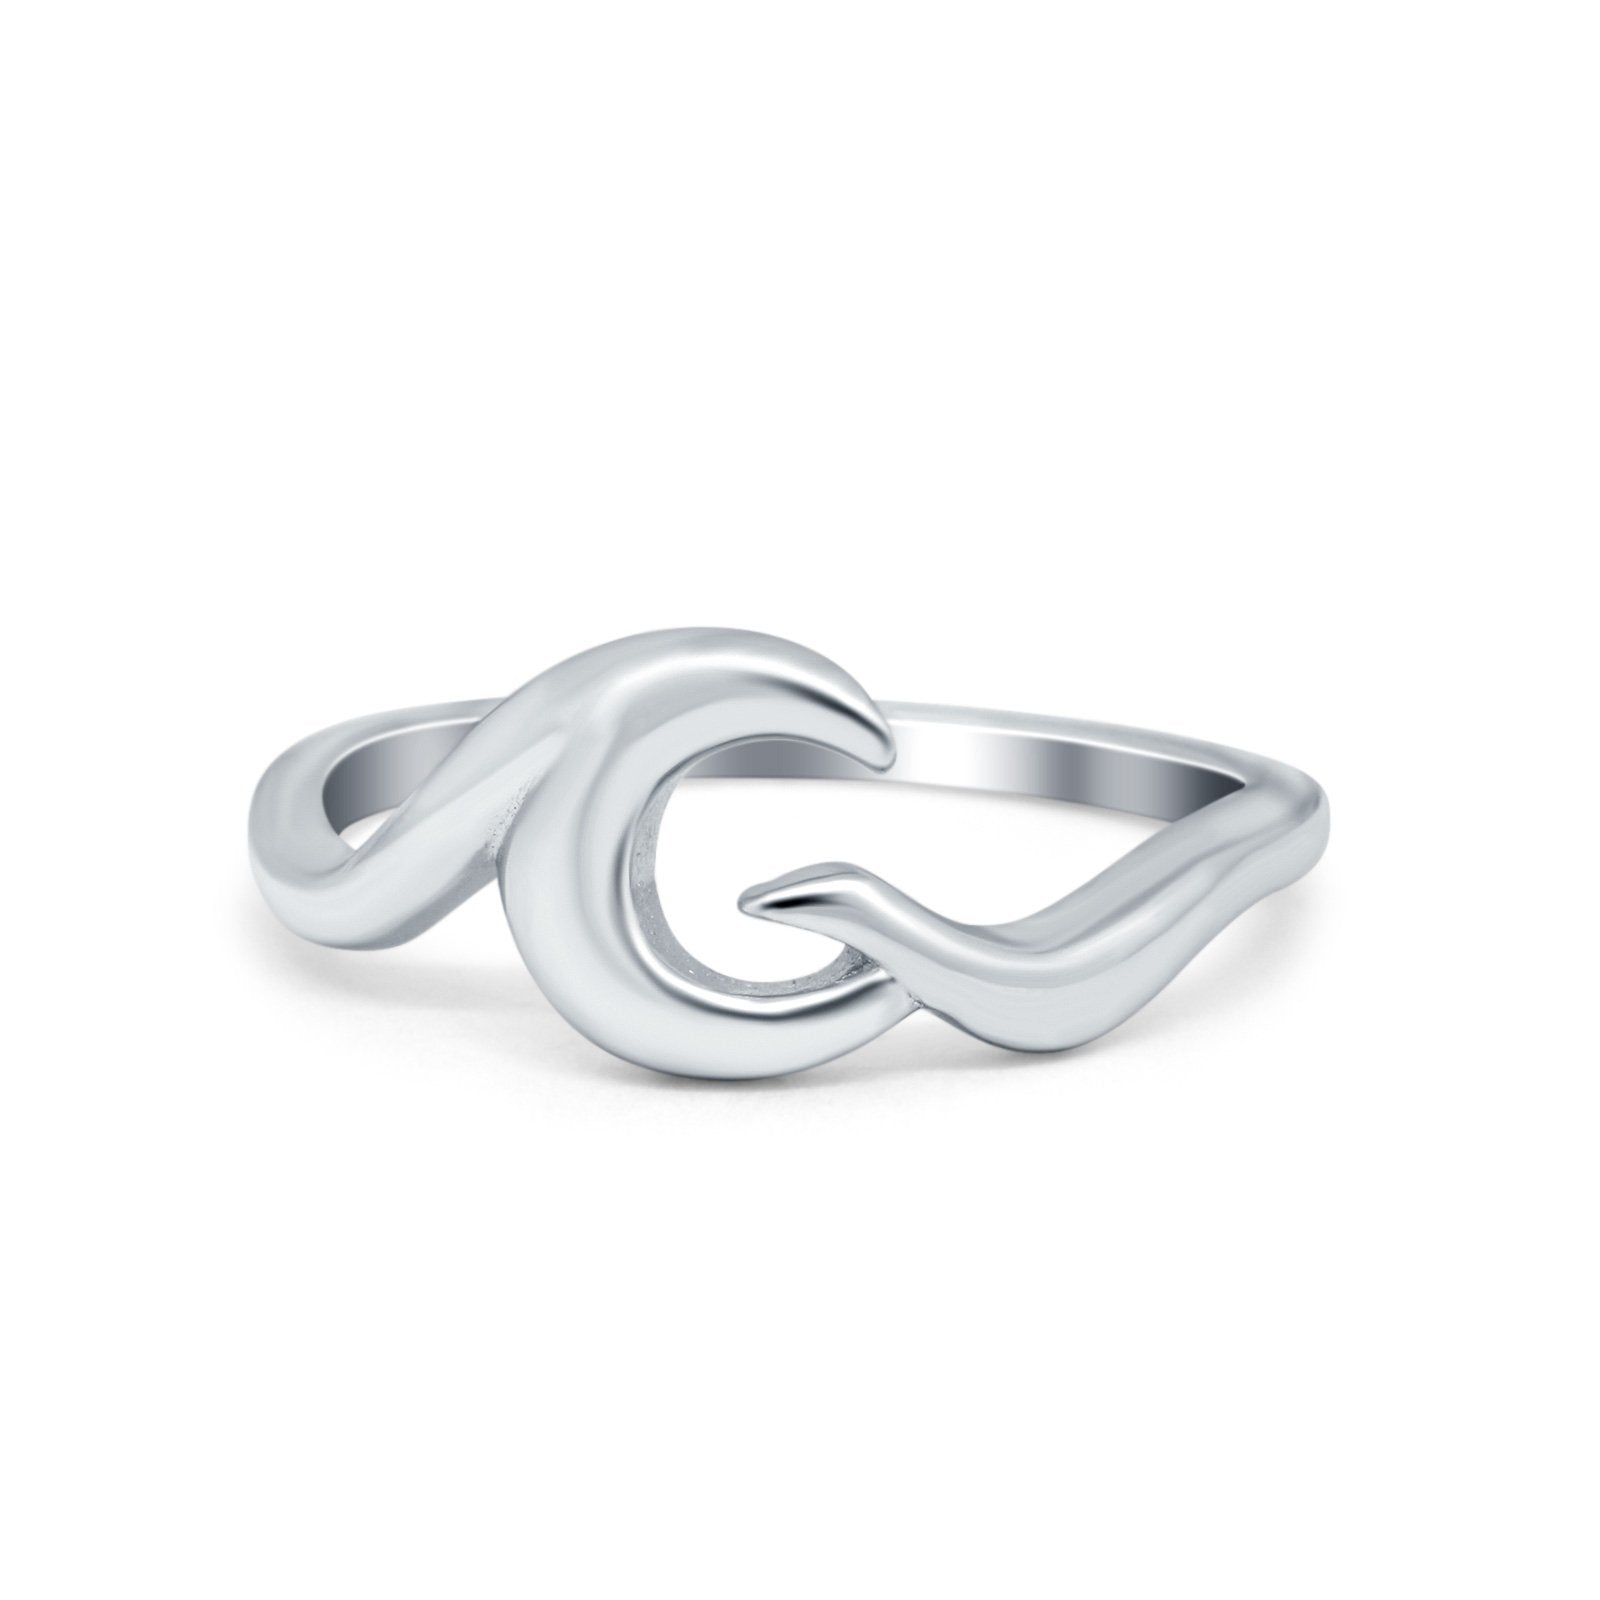 Waves Plain Ring Band 925 Sterling Silver